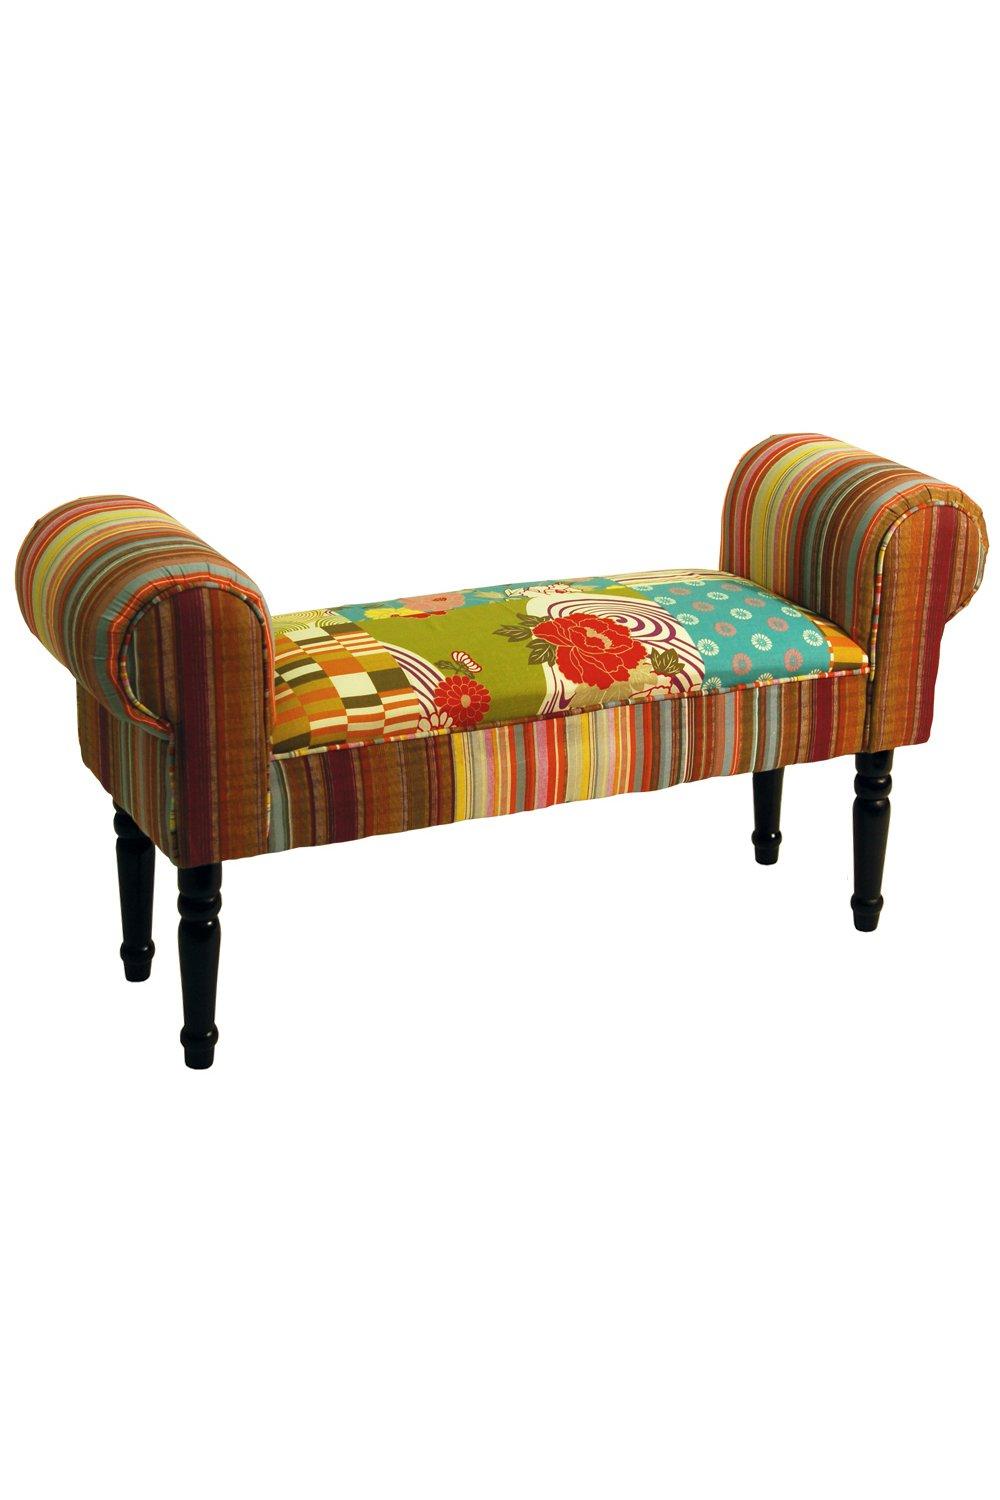 Patchwork - Shabby Chic Chaise Pouffe Padded Stool  Wood Legs - Multi-coloured